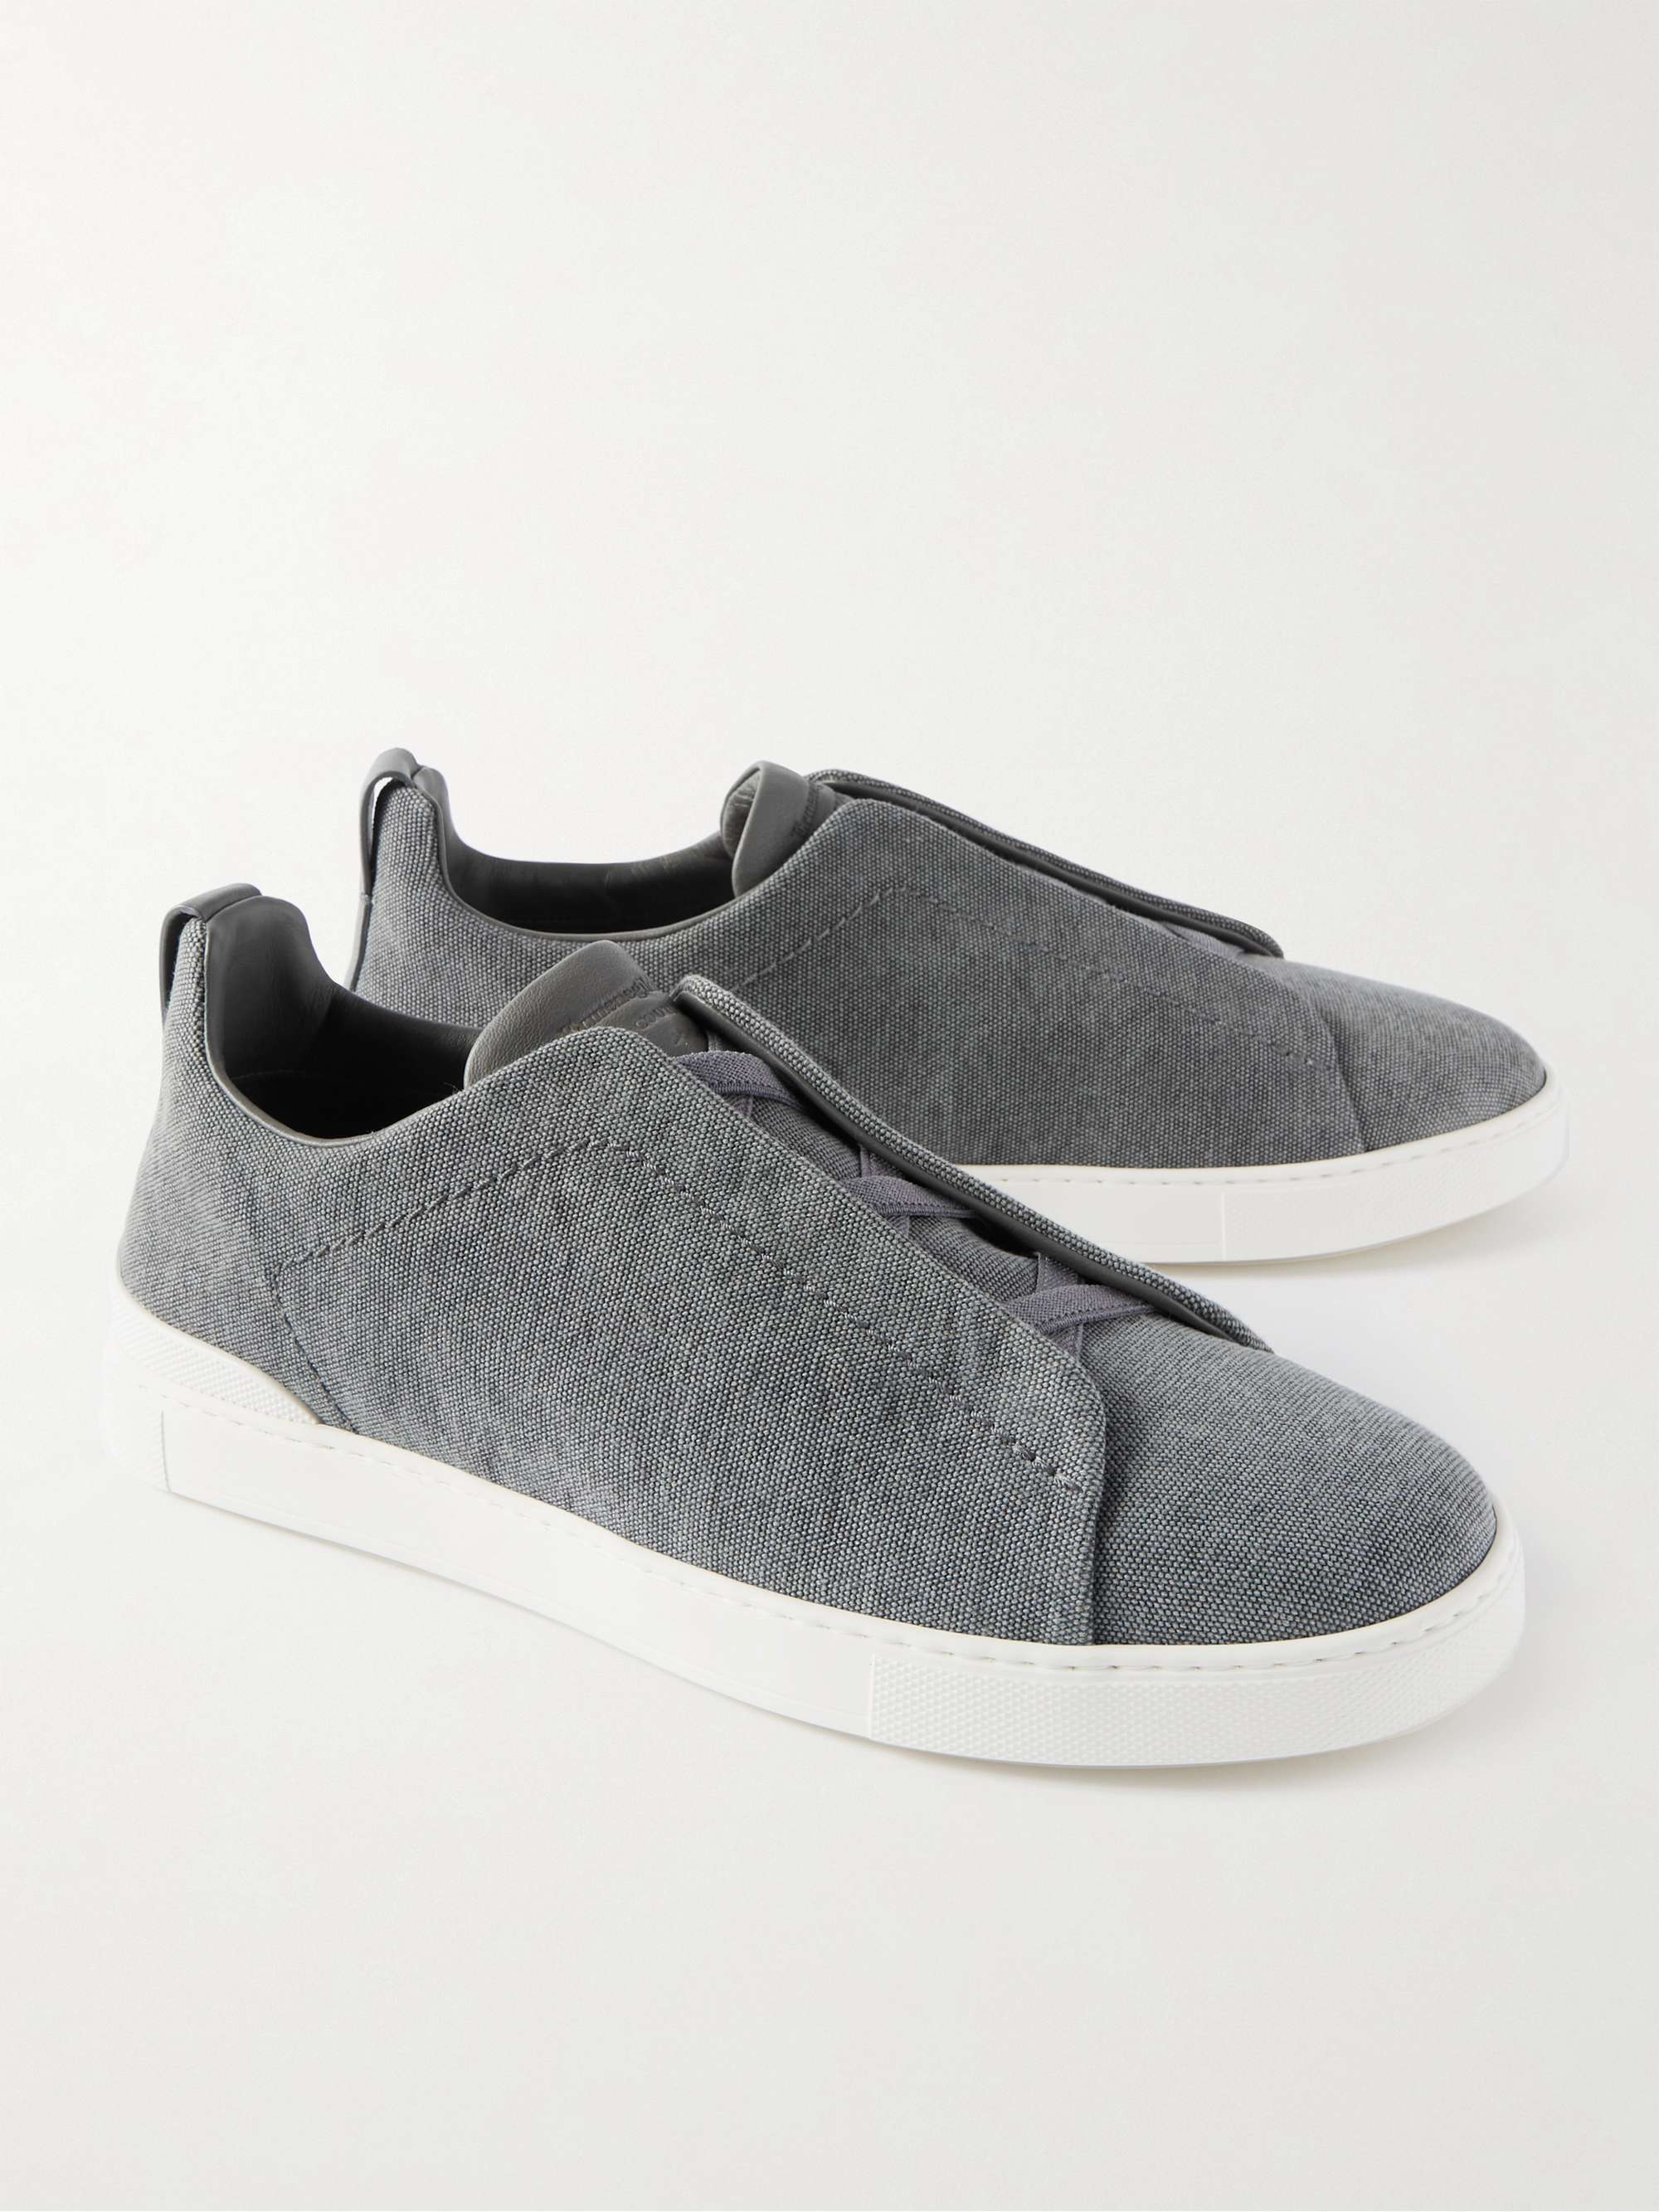 ZEGNA Triple Stitch Leather-Trimmed Canvas Sneakers